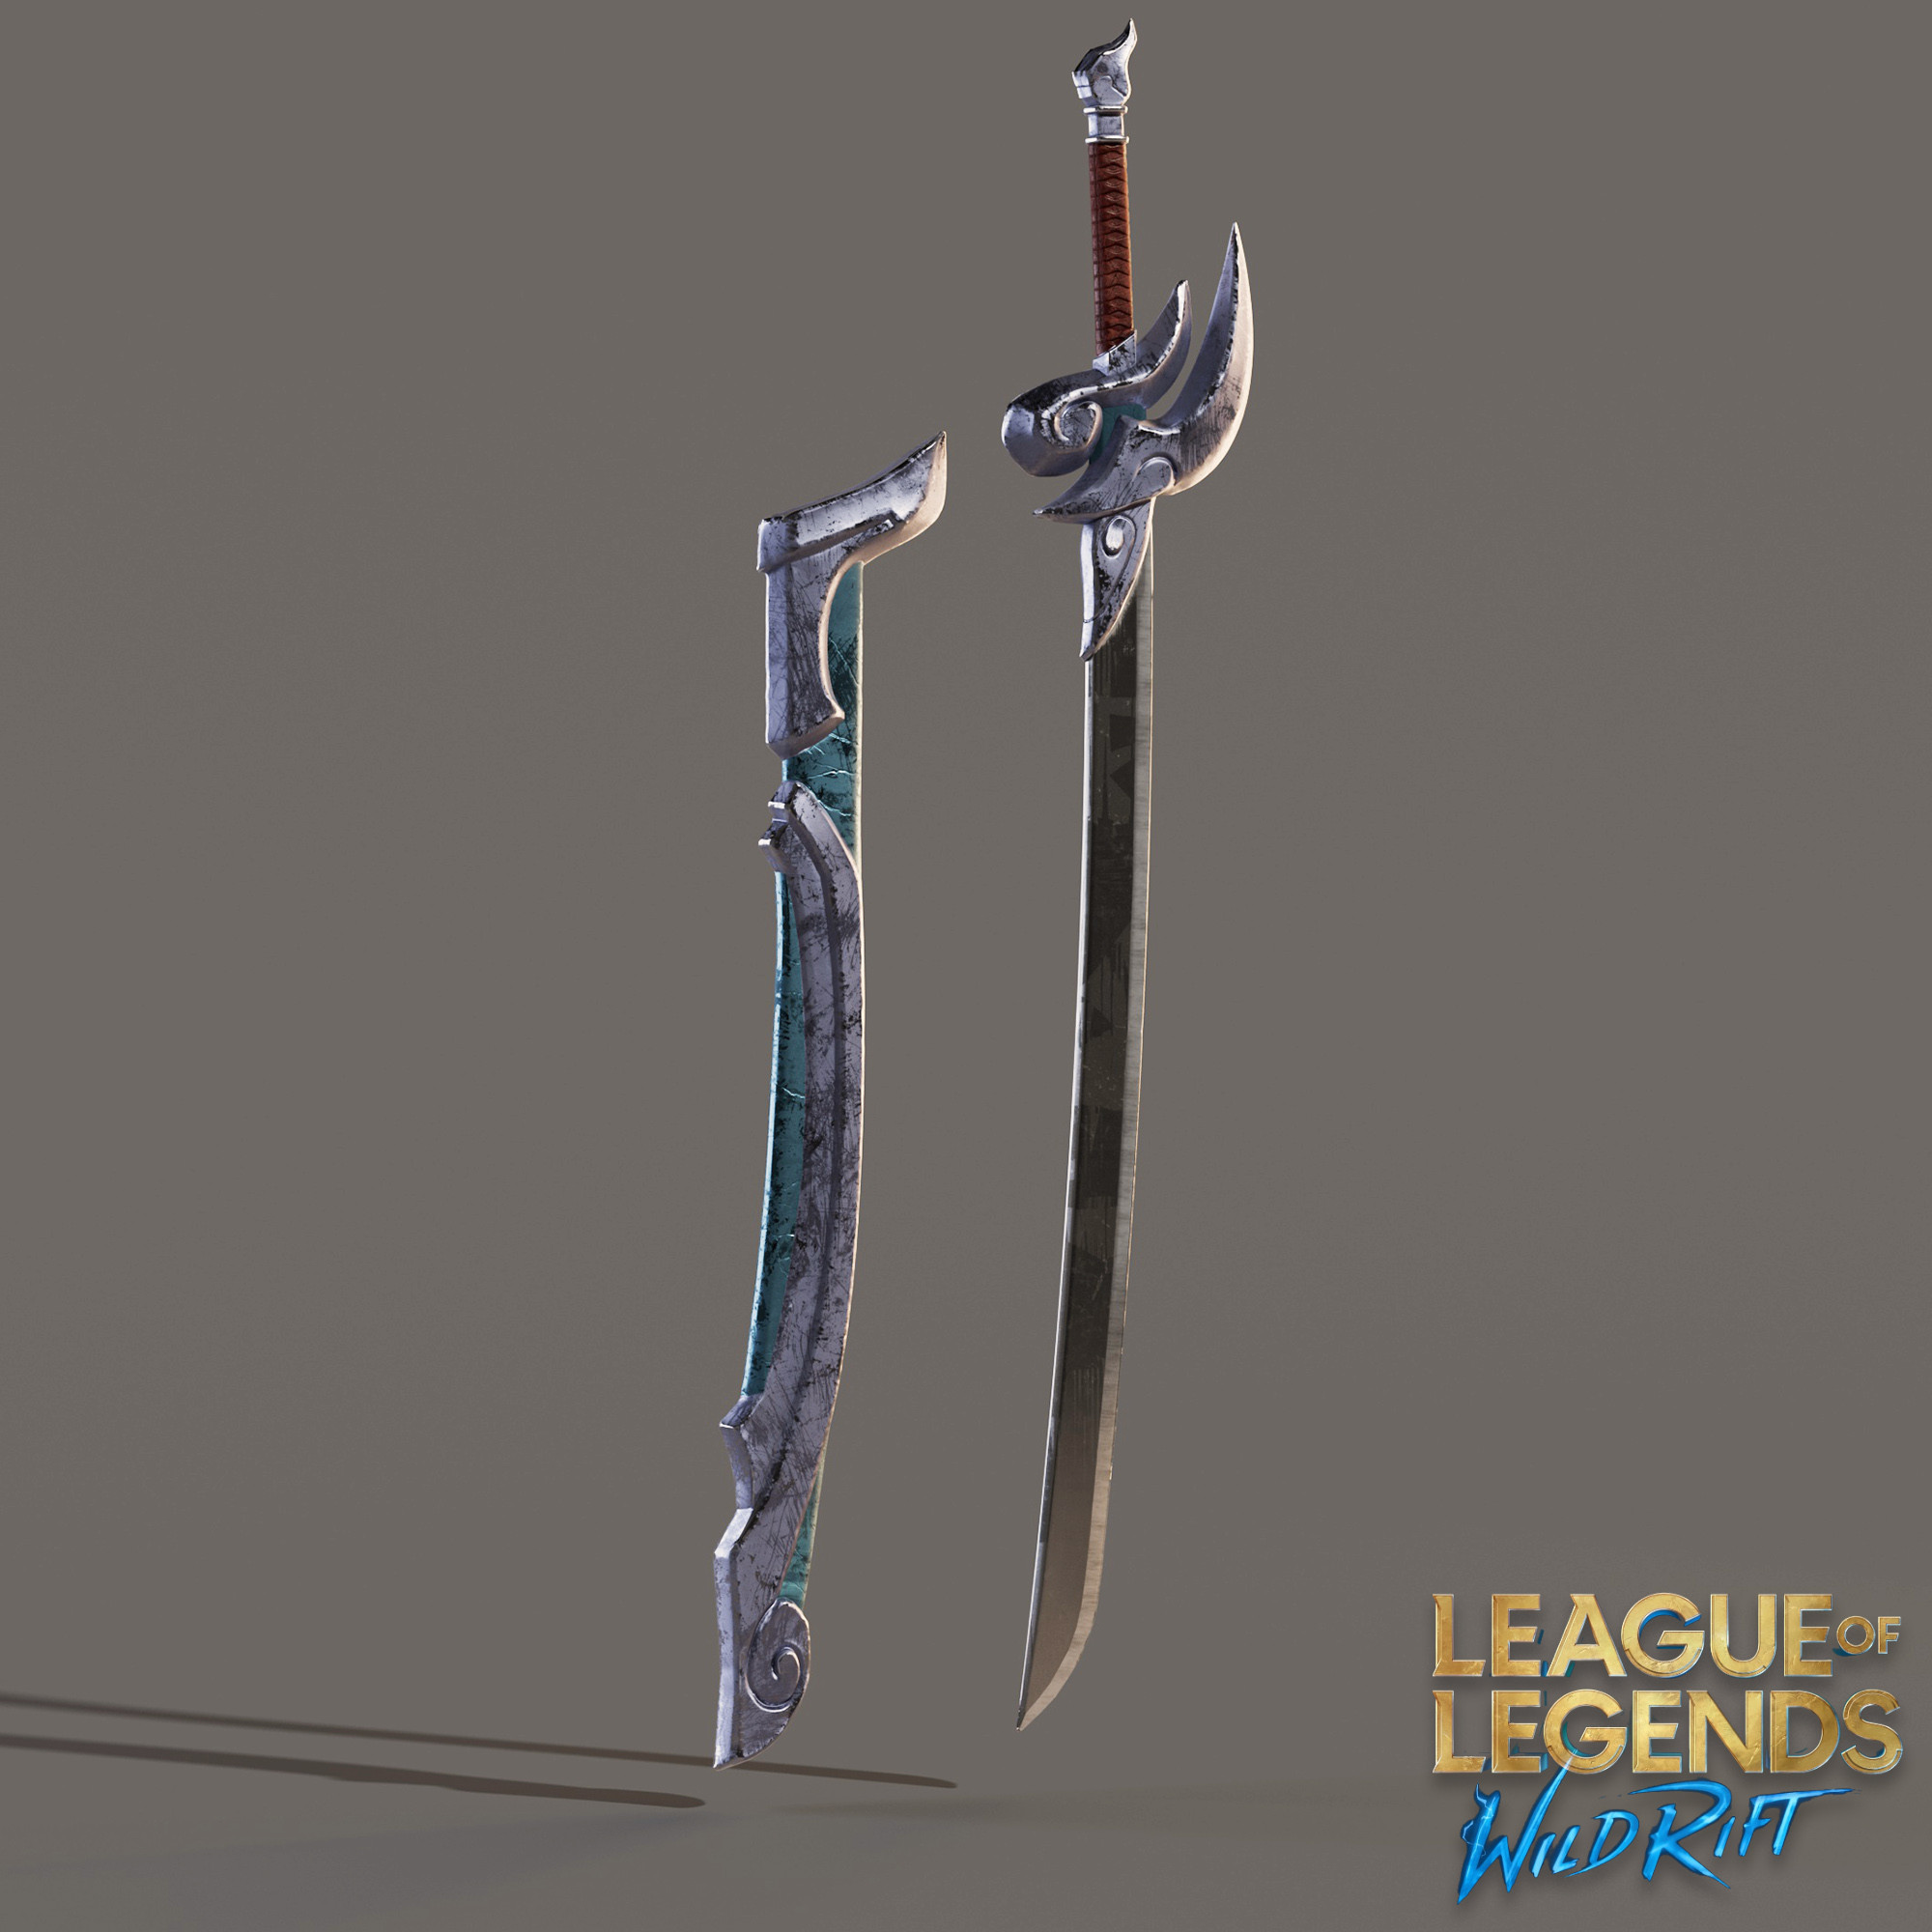 Yasuo Prop - The Sword - All props and characters has layer layers of strokes and graphic patterns applied to stylize the look and put them all in the same universe. 